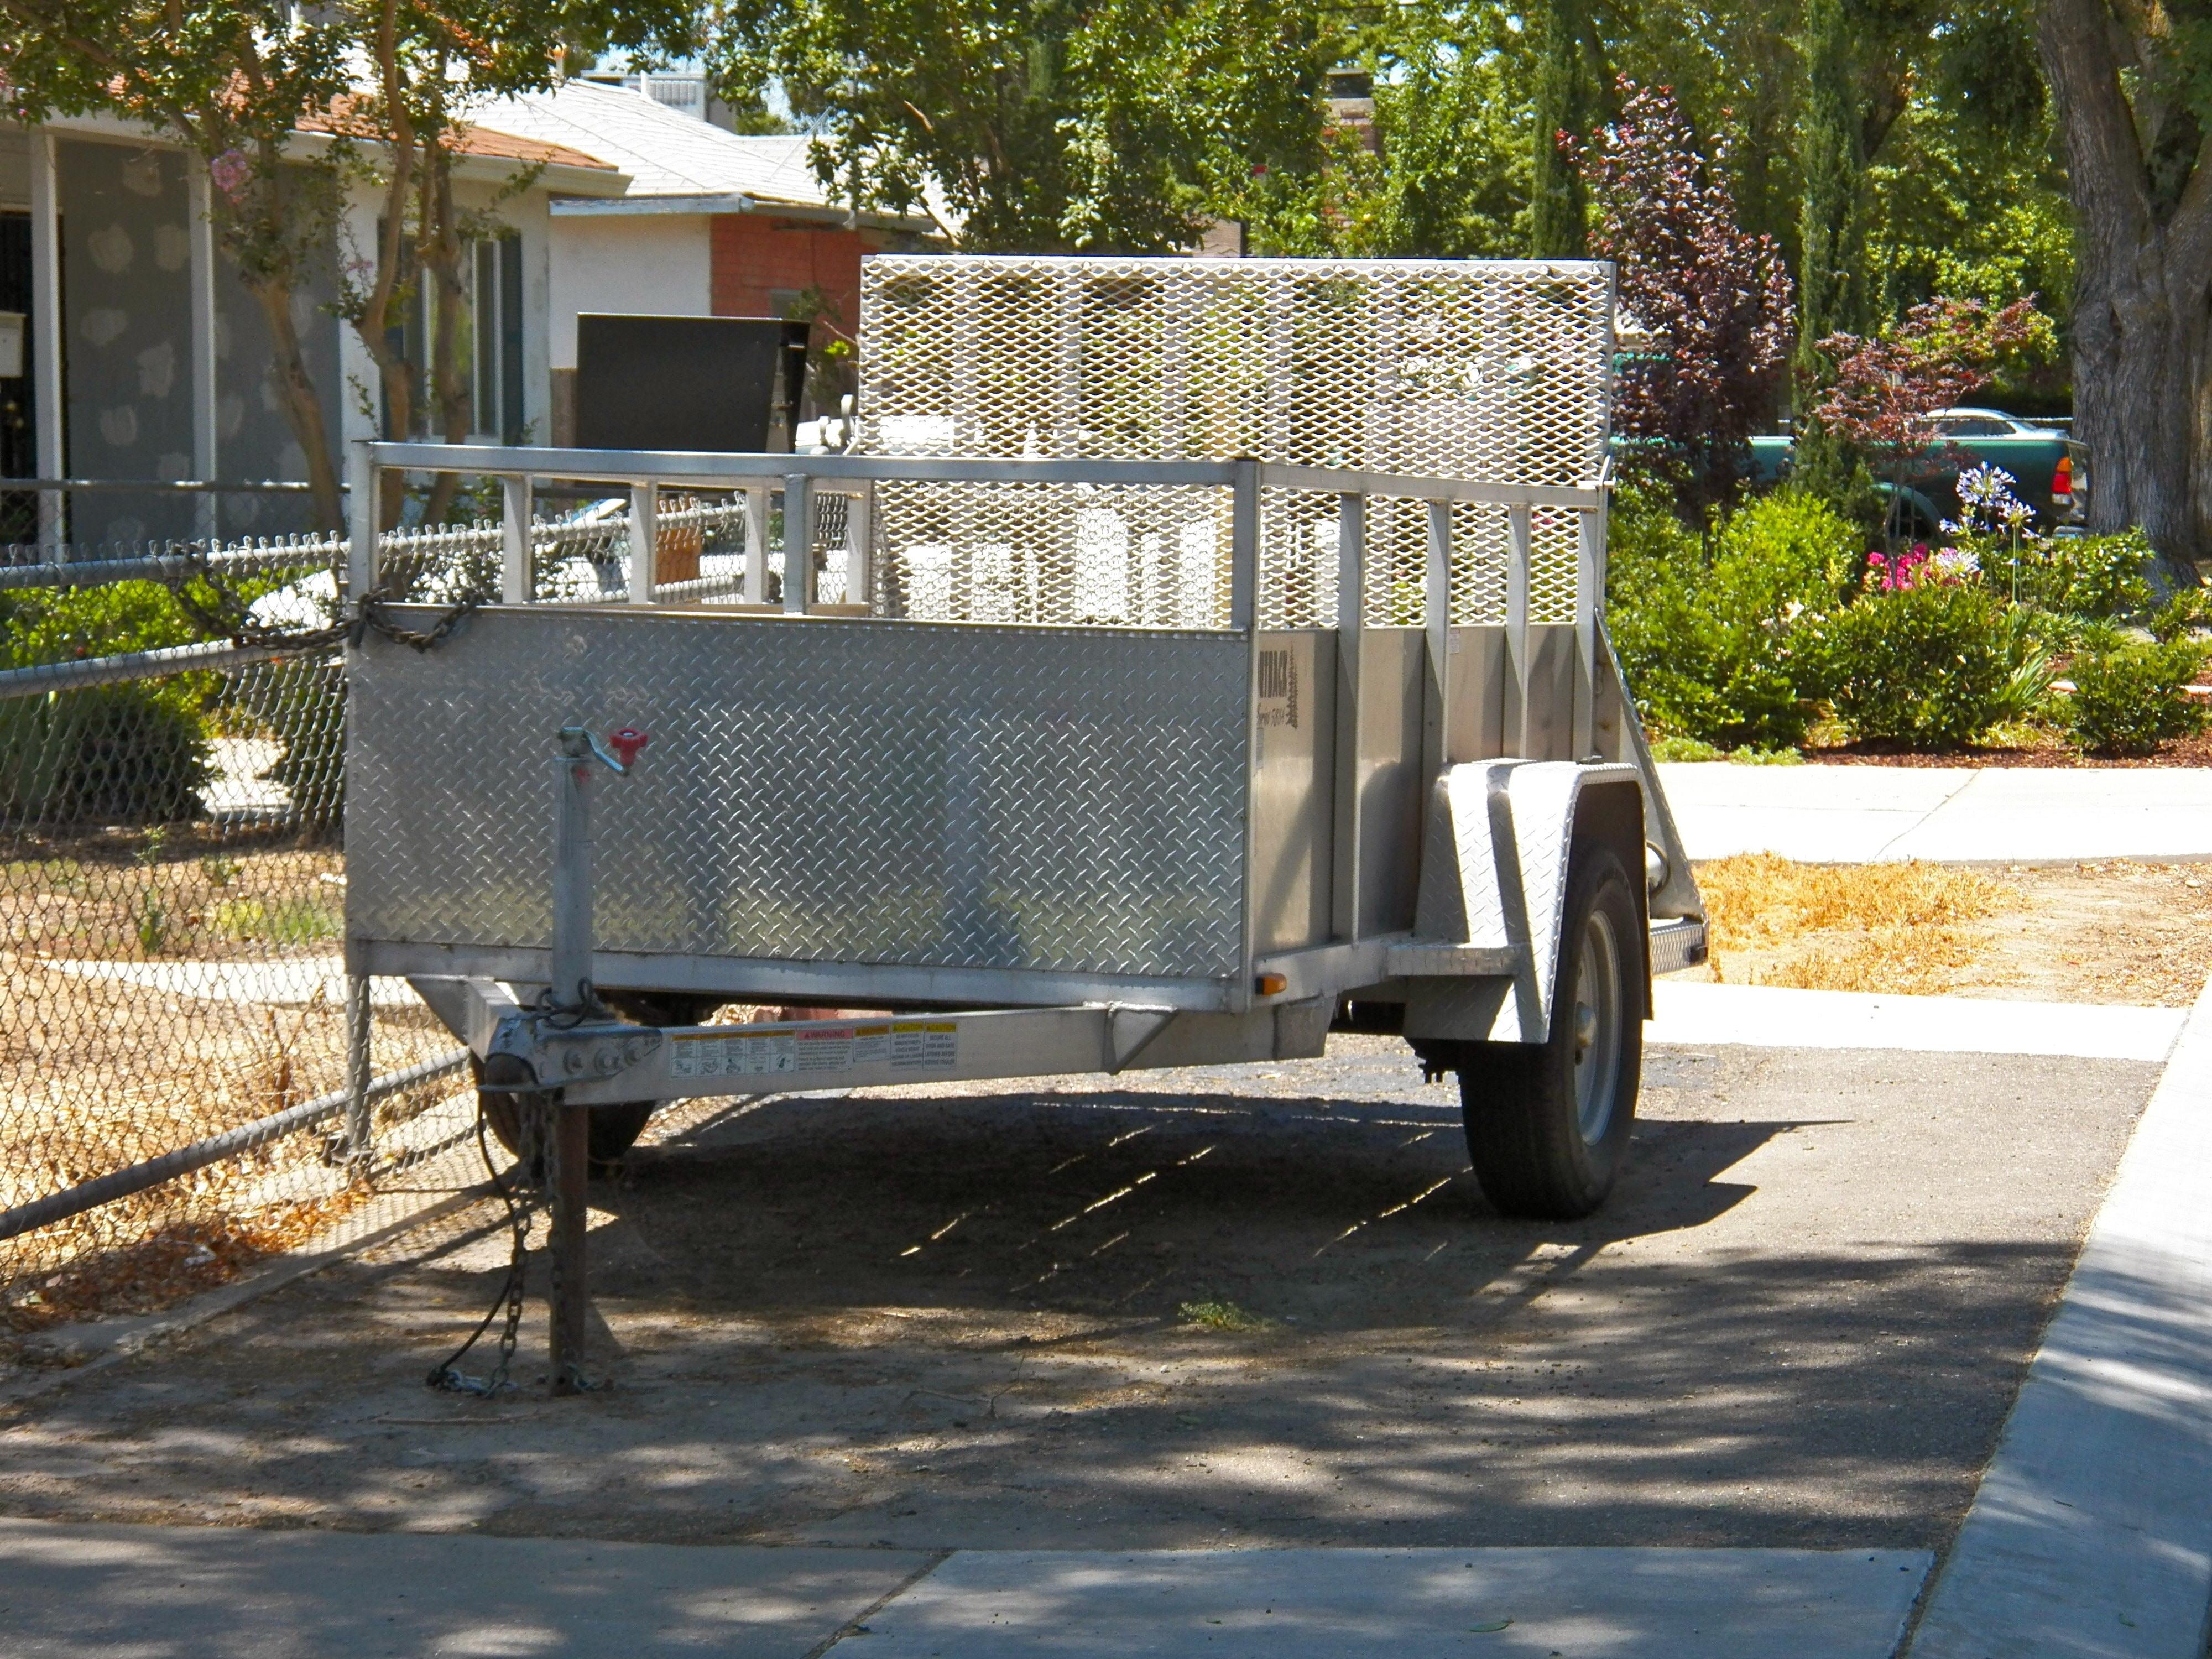 Vehicle, Transport, Trailer, Cart, outdoors, day